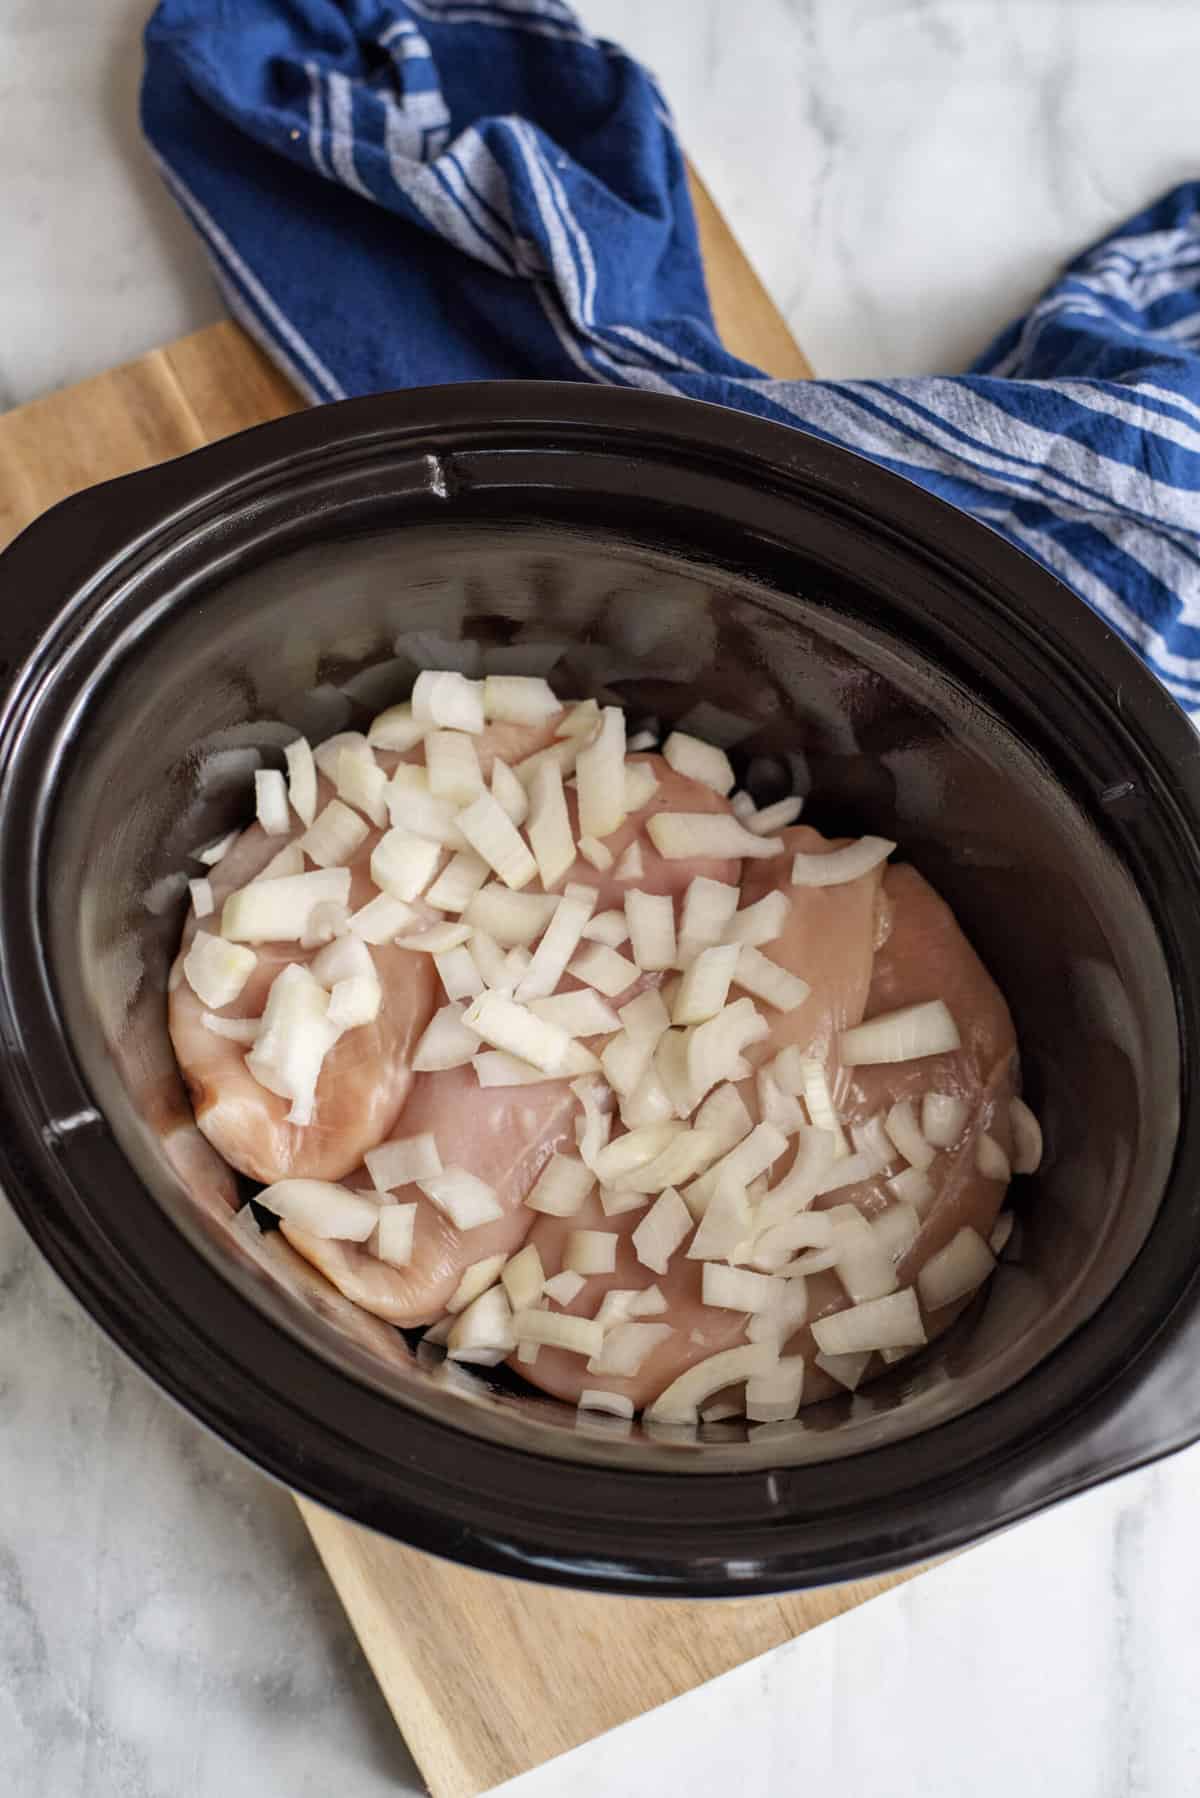 Place chicken and onion in slow cooker.